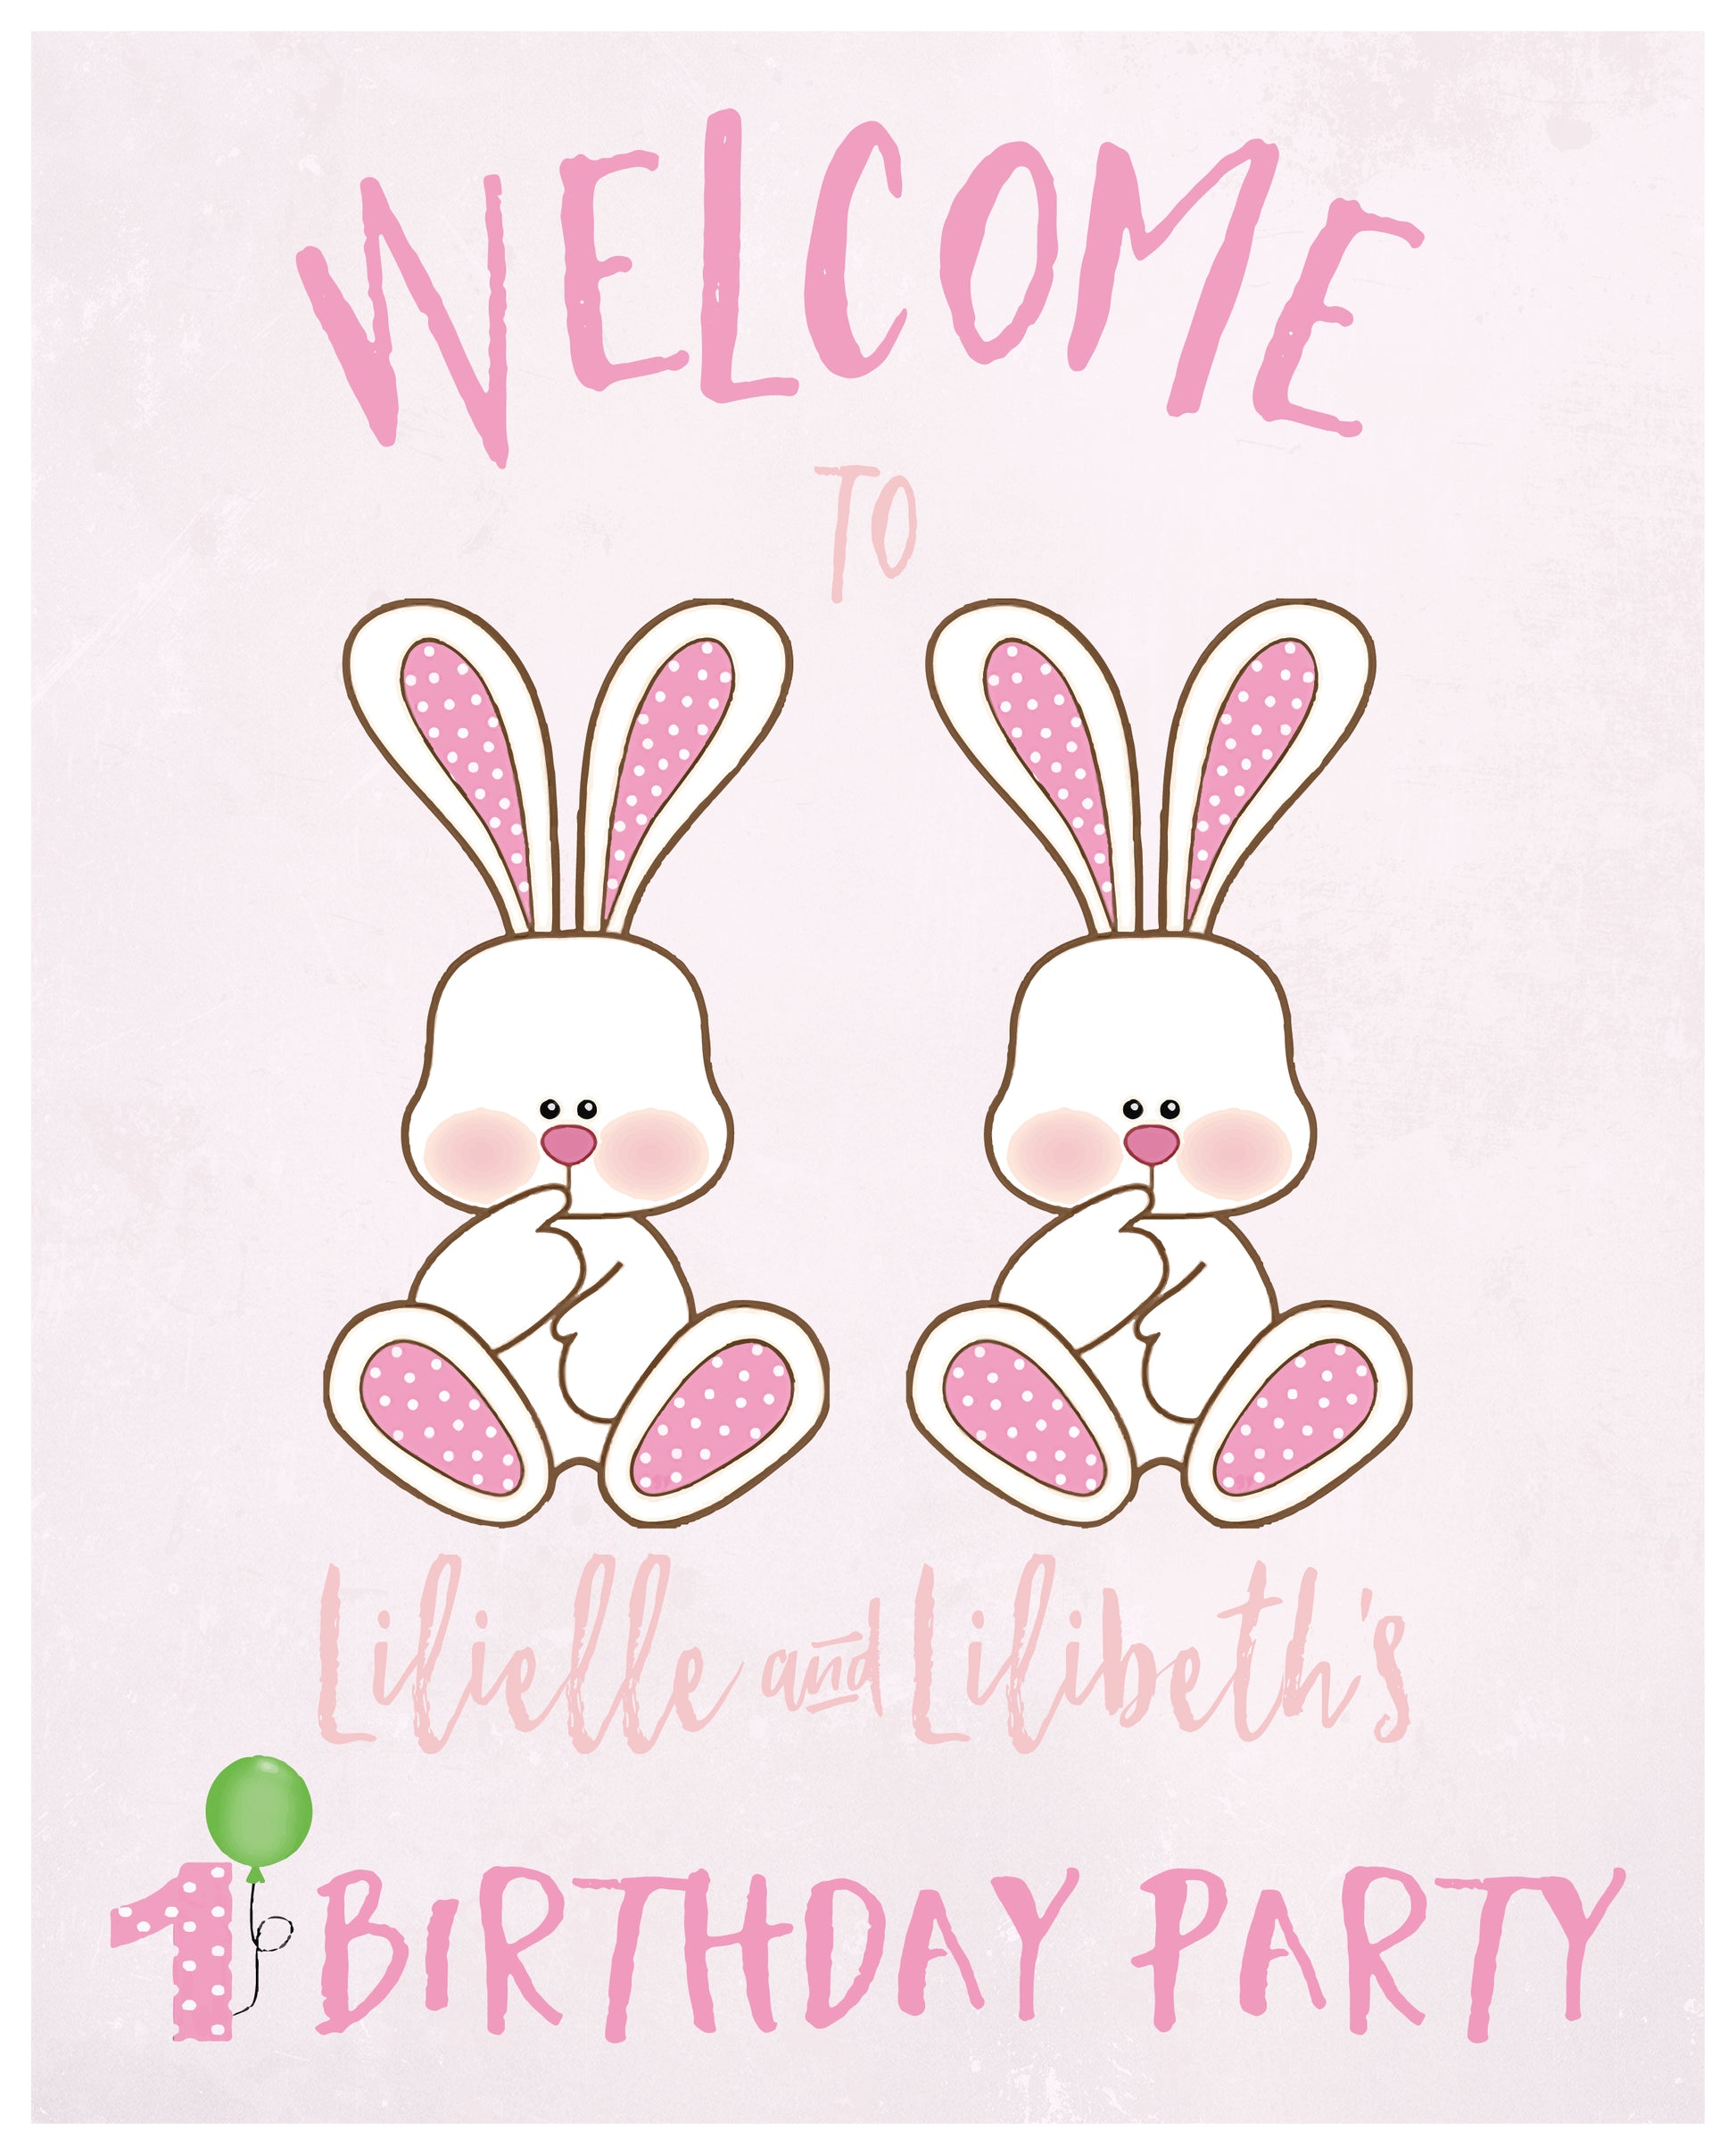 Some bunnies welcome poster